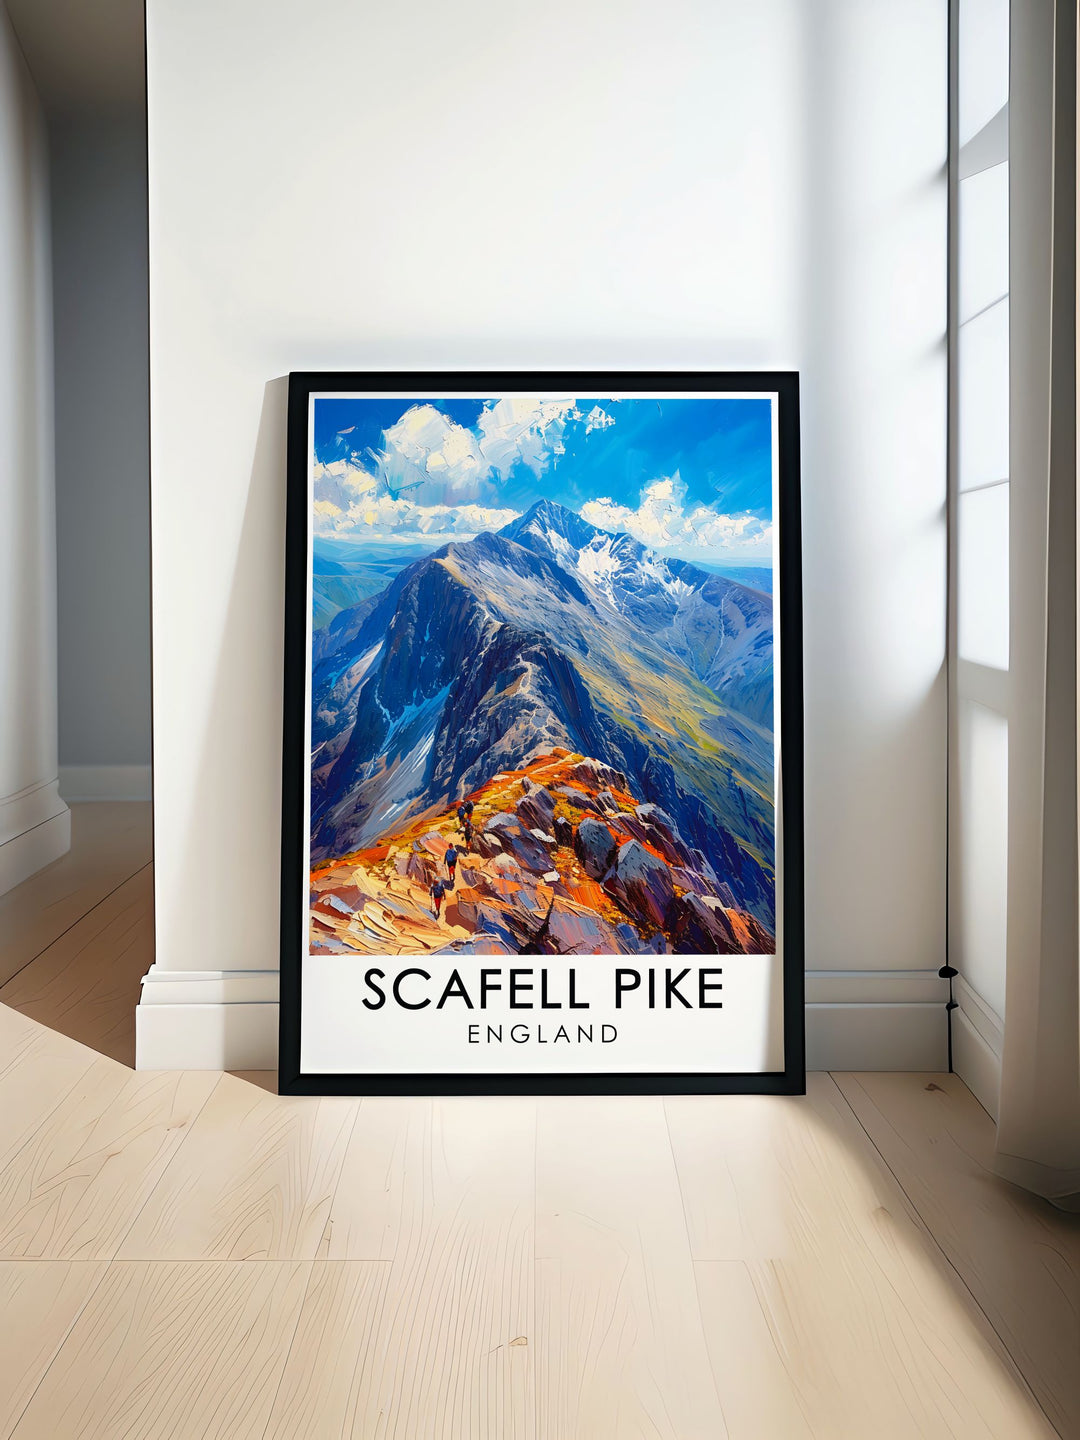 Scenic art of Scafell Pike, Englands tallest mountain, with detailed illustrations. This print is perfect for nature lovers and those who appreciate fine art prints of iconic landscapes.